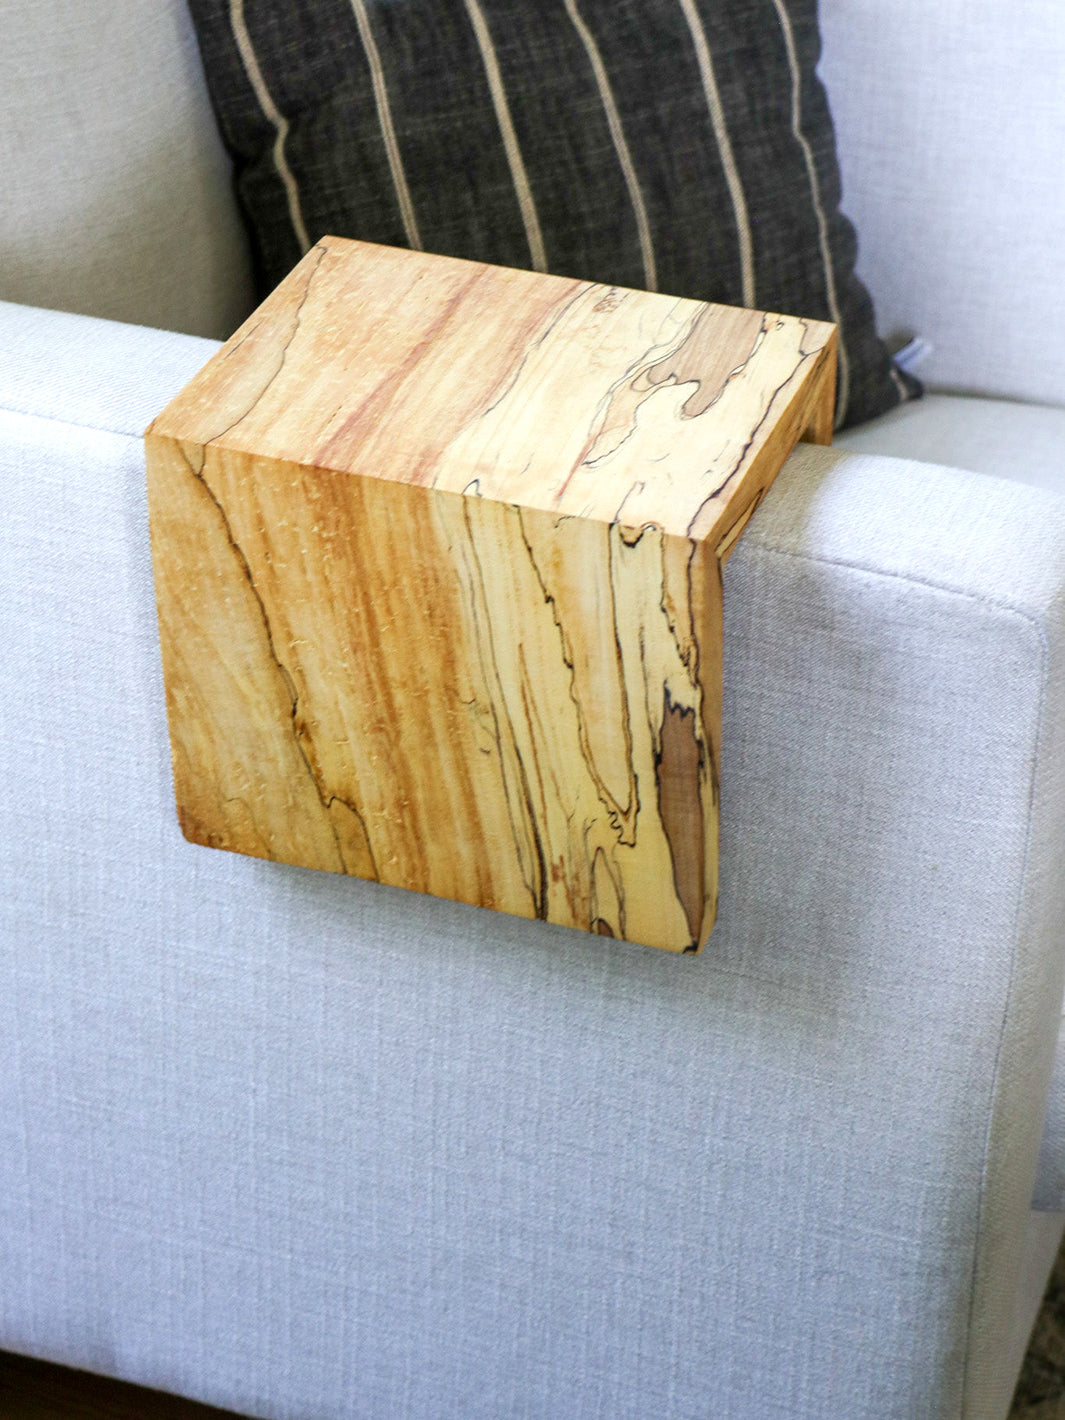 Solid 5" Spalted Maple Sofa Armrest Table (in stock) Earthly Comfort Arm Table 2230-3